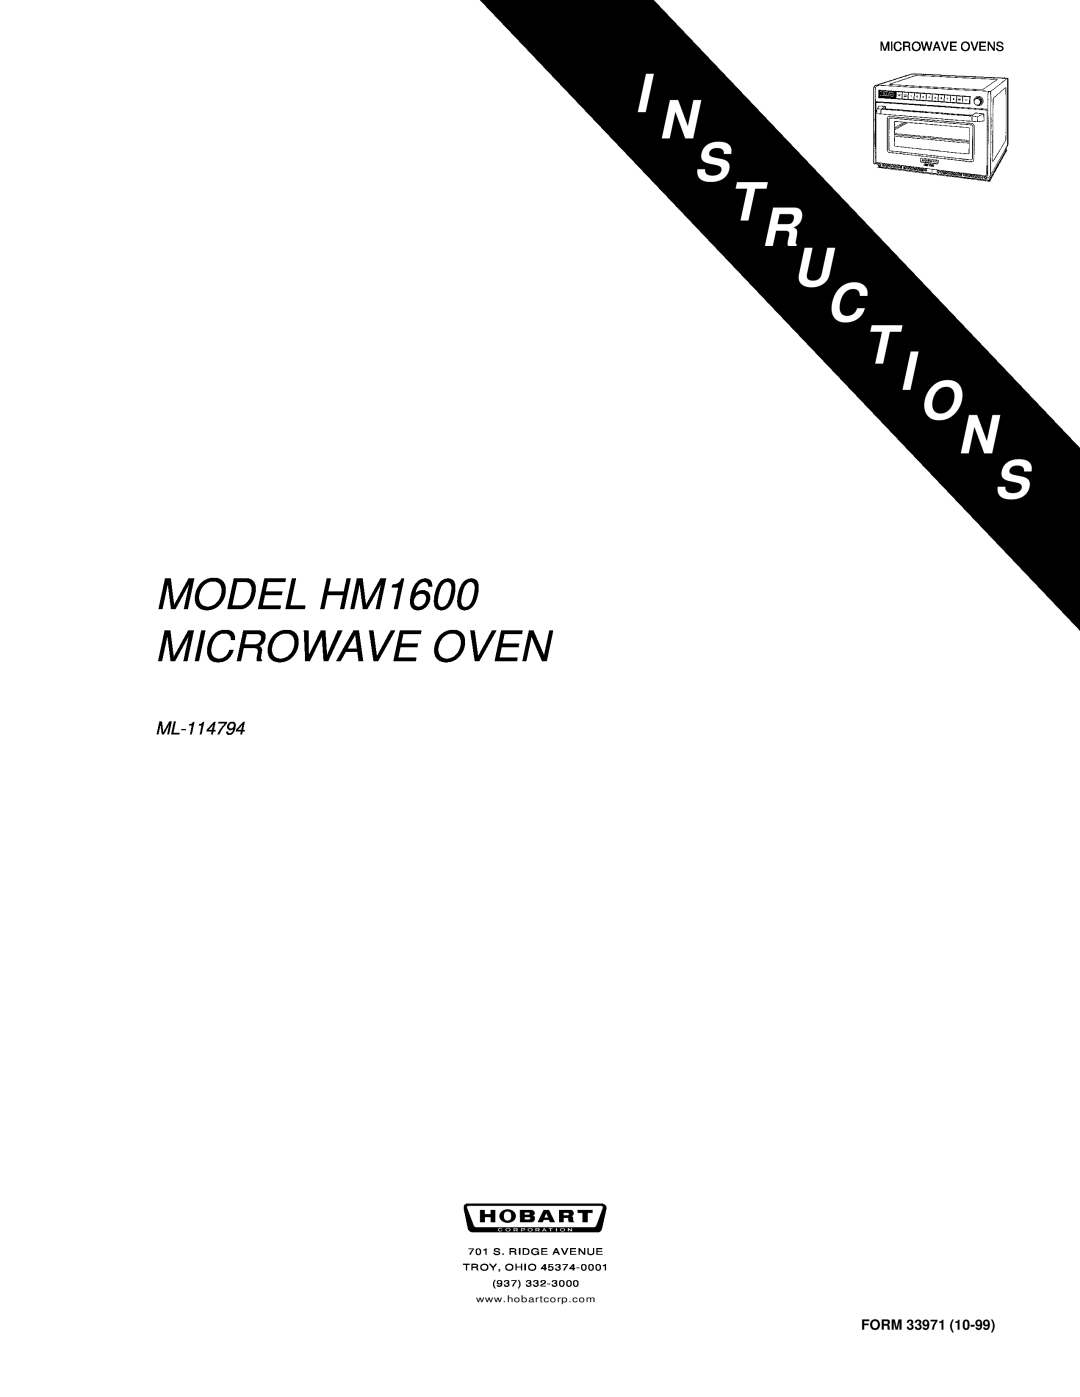 Hobart manual I N S Tr Uc Ti On S, MODEL HM1600 MICROWAVE OVEN, ML-114794, Form, Microwave Ovens 